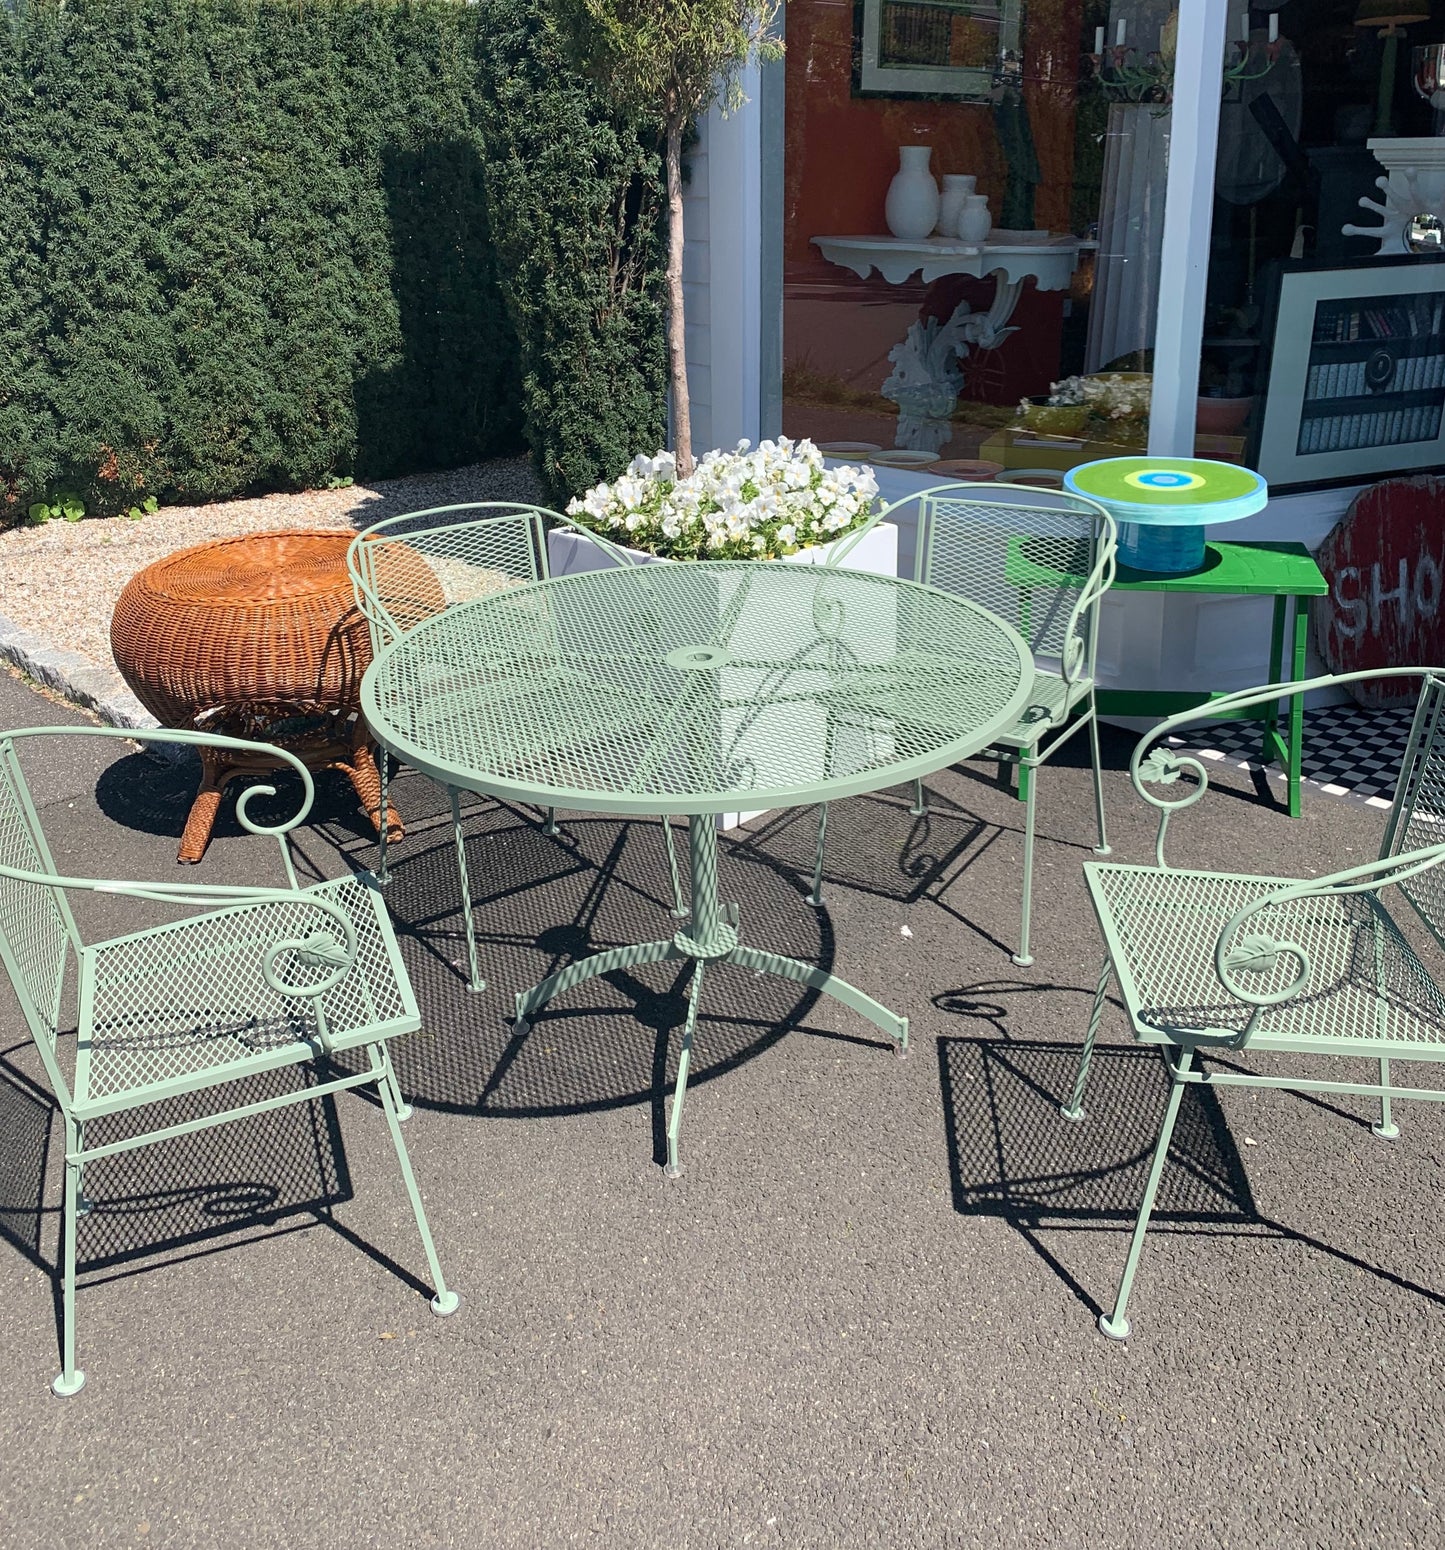 1960’s Outdoor Table + 4 Arm Chairs - SALE 30% off marked price